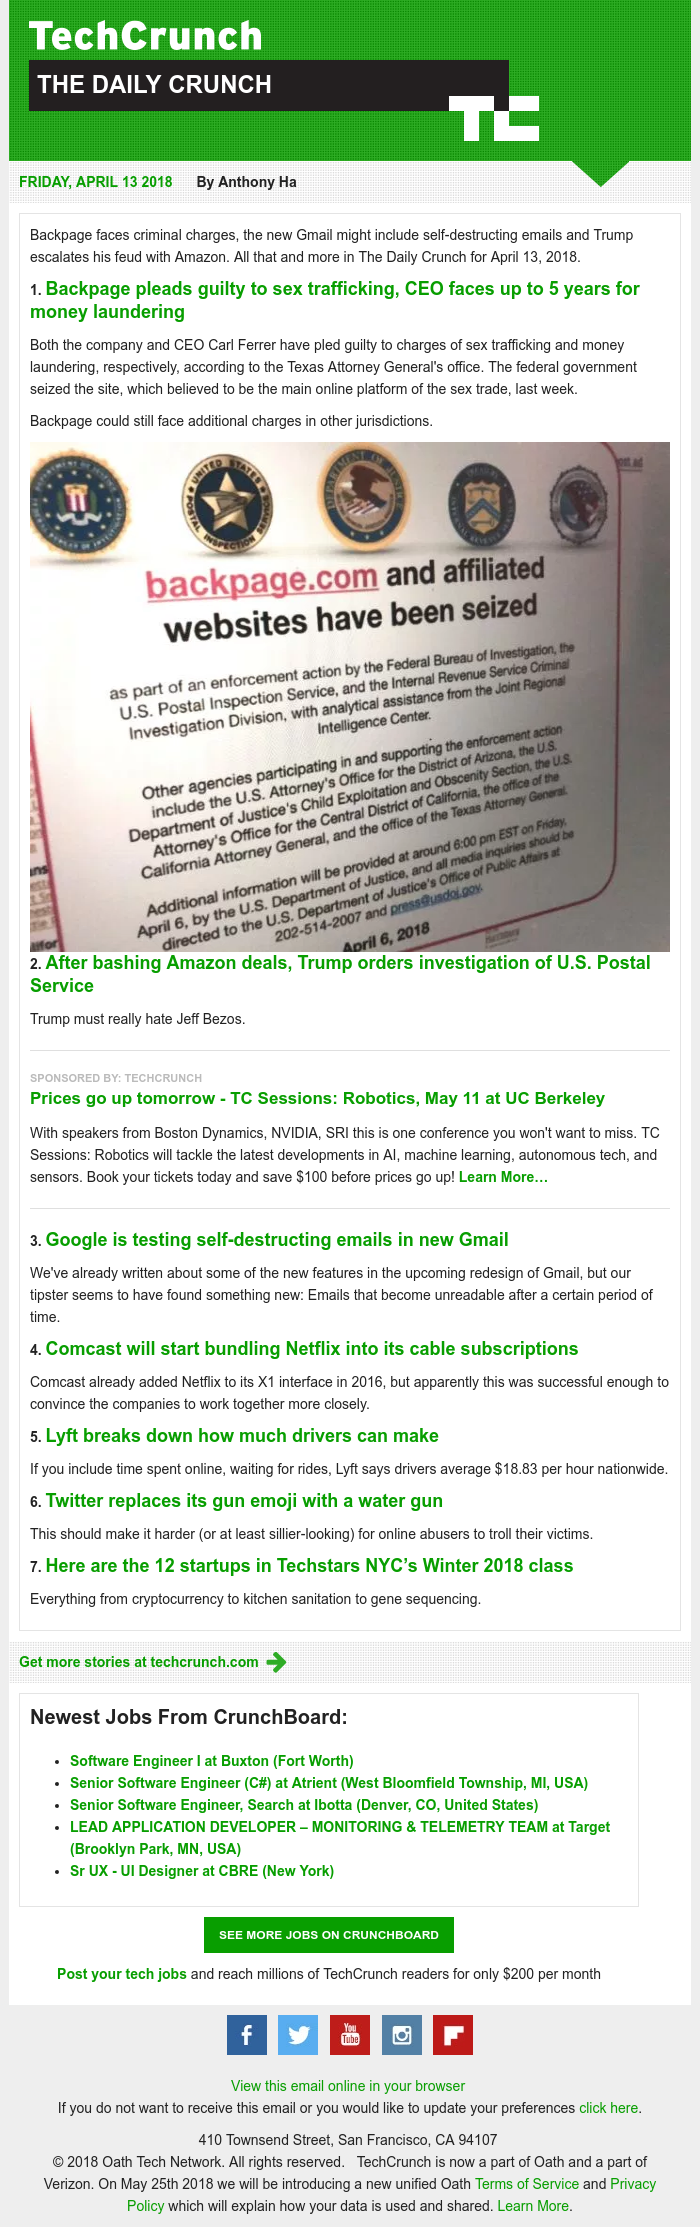 Screenshot of email with subject /media/emails/365c493c-6798-44e3-ad56-fcb6a626b007.png